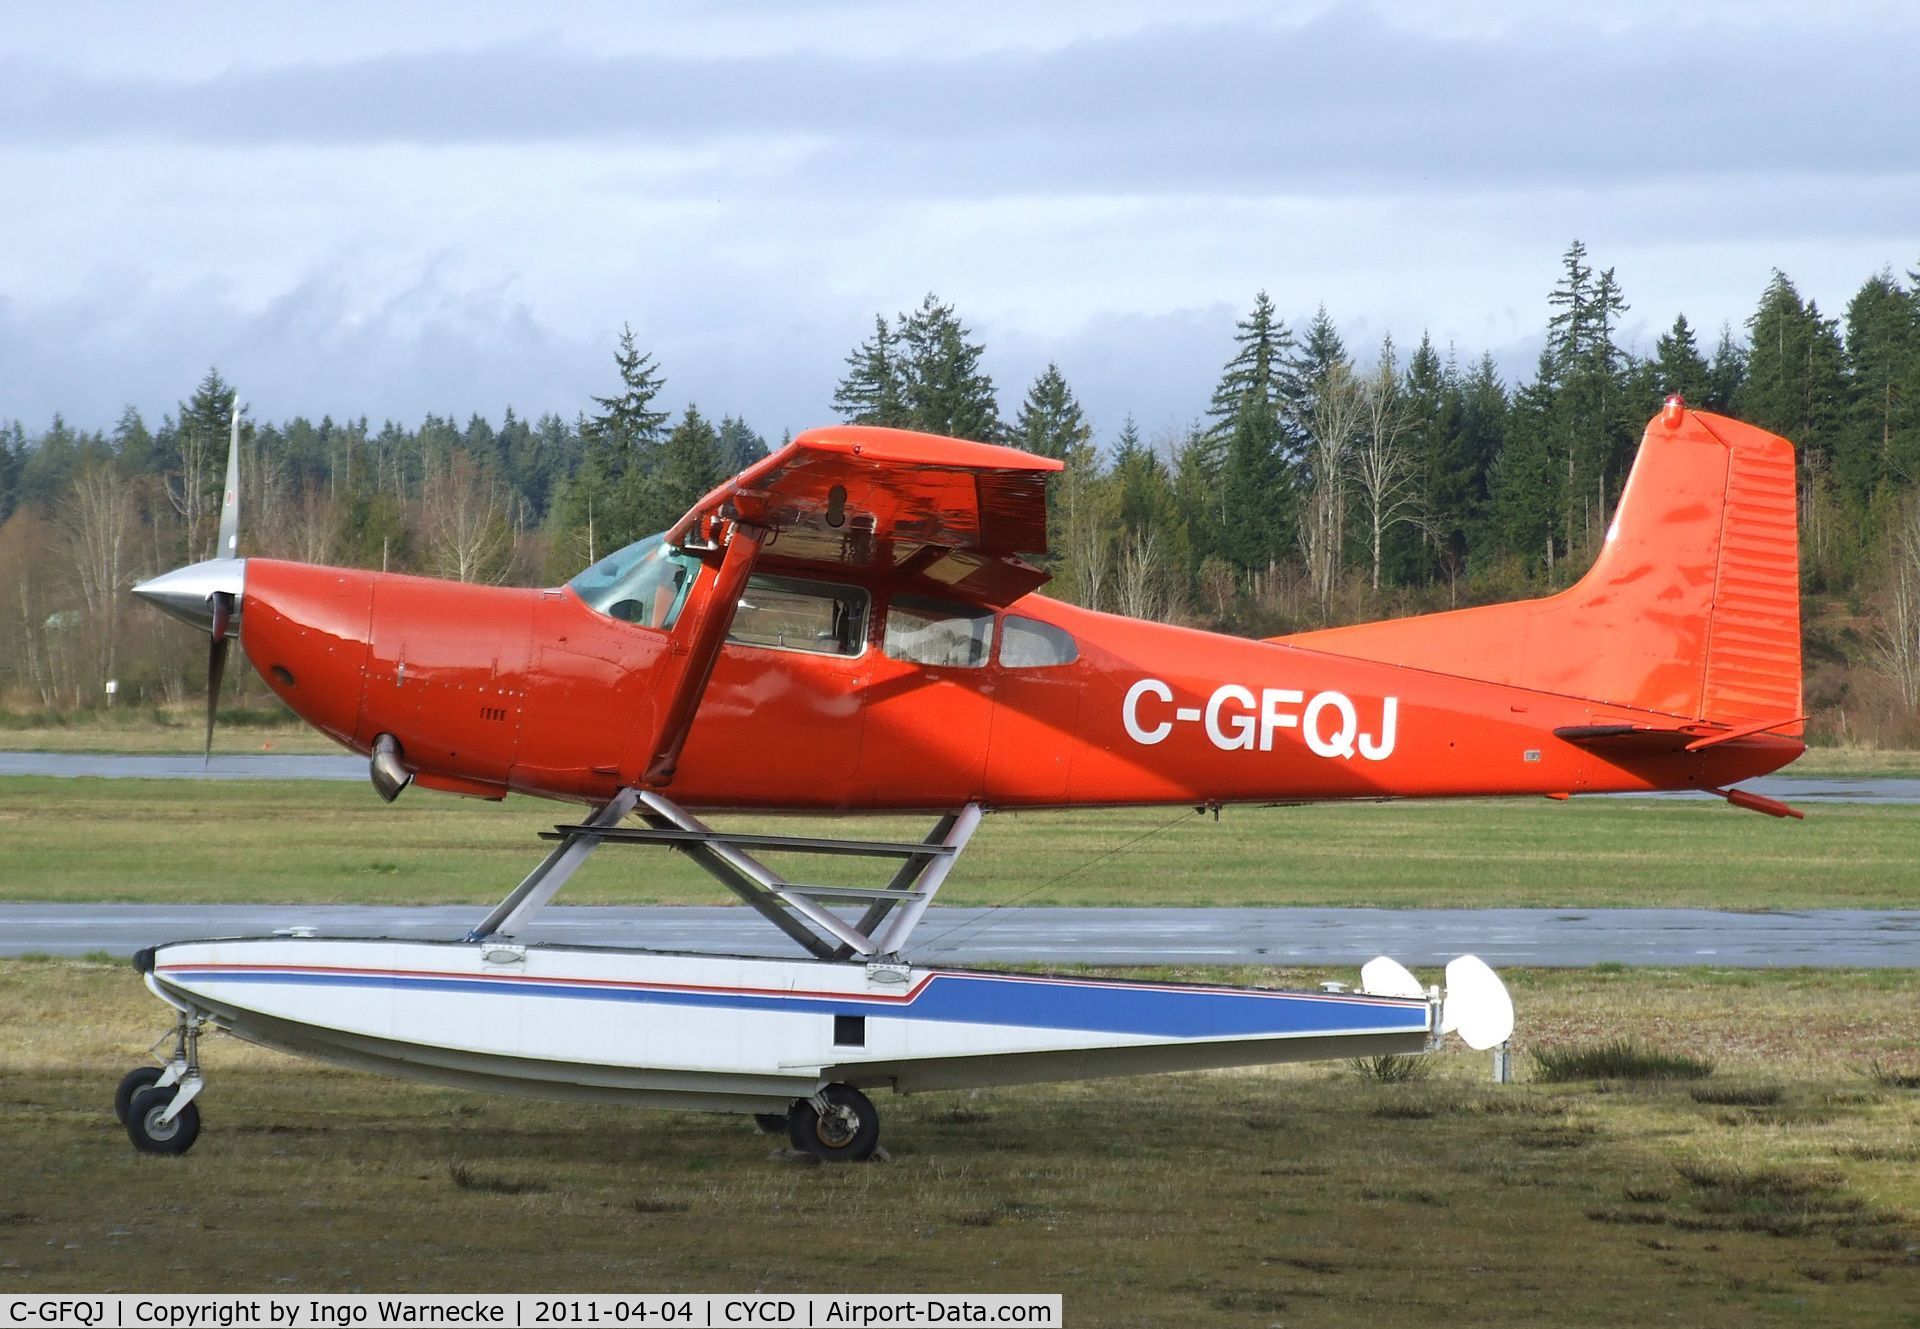 C-GFQJ, 2010 BAKER TURBO C/N 001, Baker Turbo (Cessna 185 Skywagon converted to Rolls-Royce Allison turboprop) on amphibious floats at Nanaimo Airport, Cassidy BC